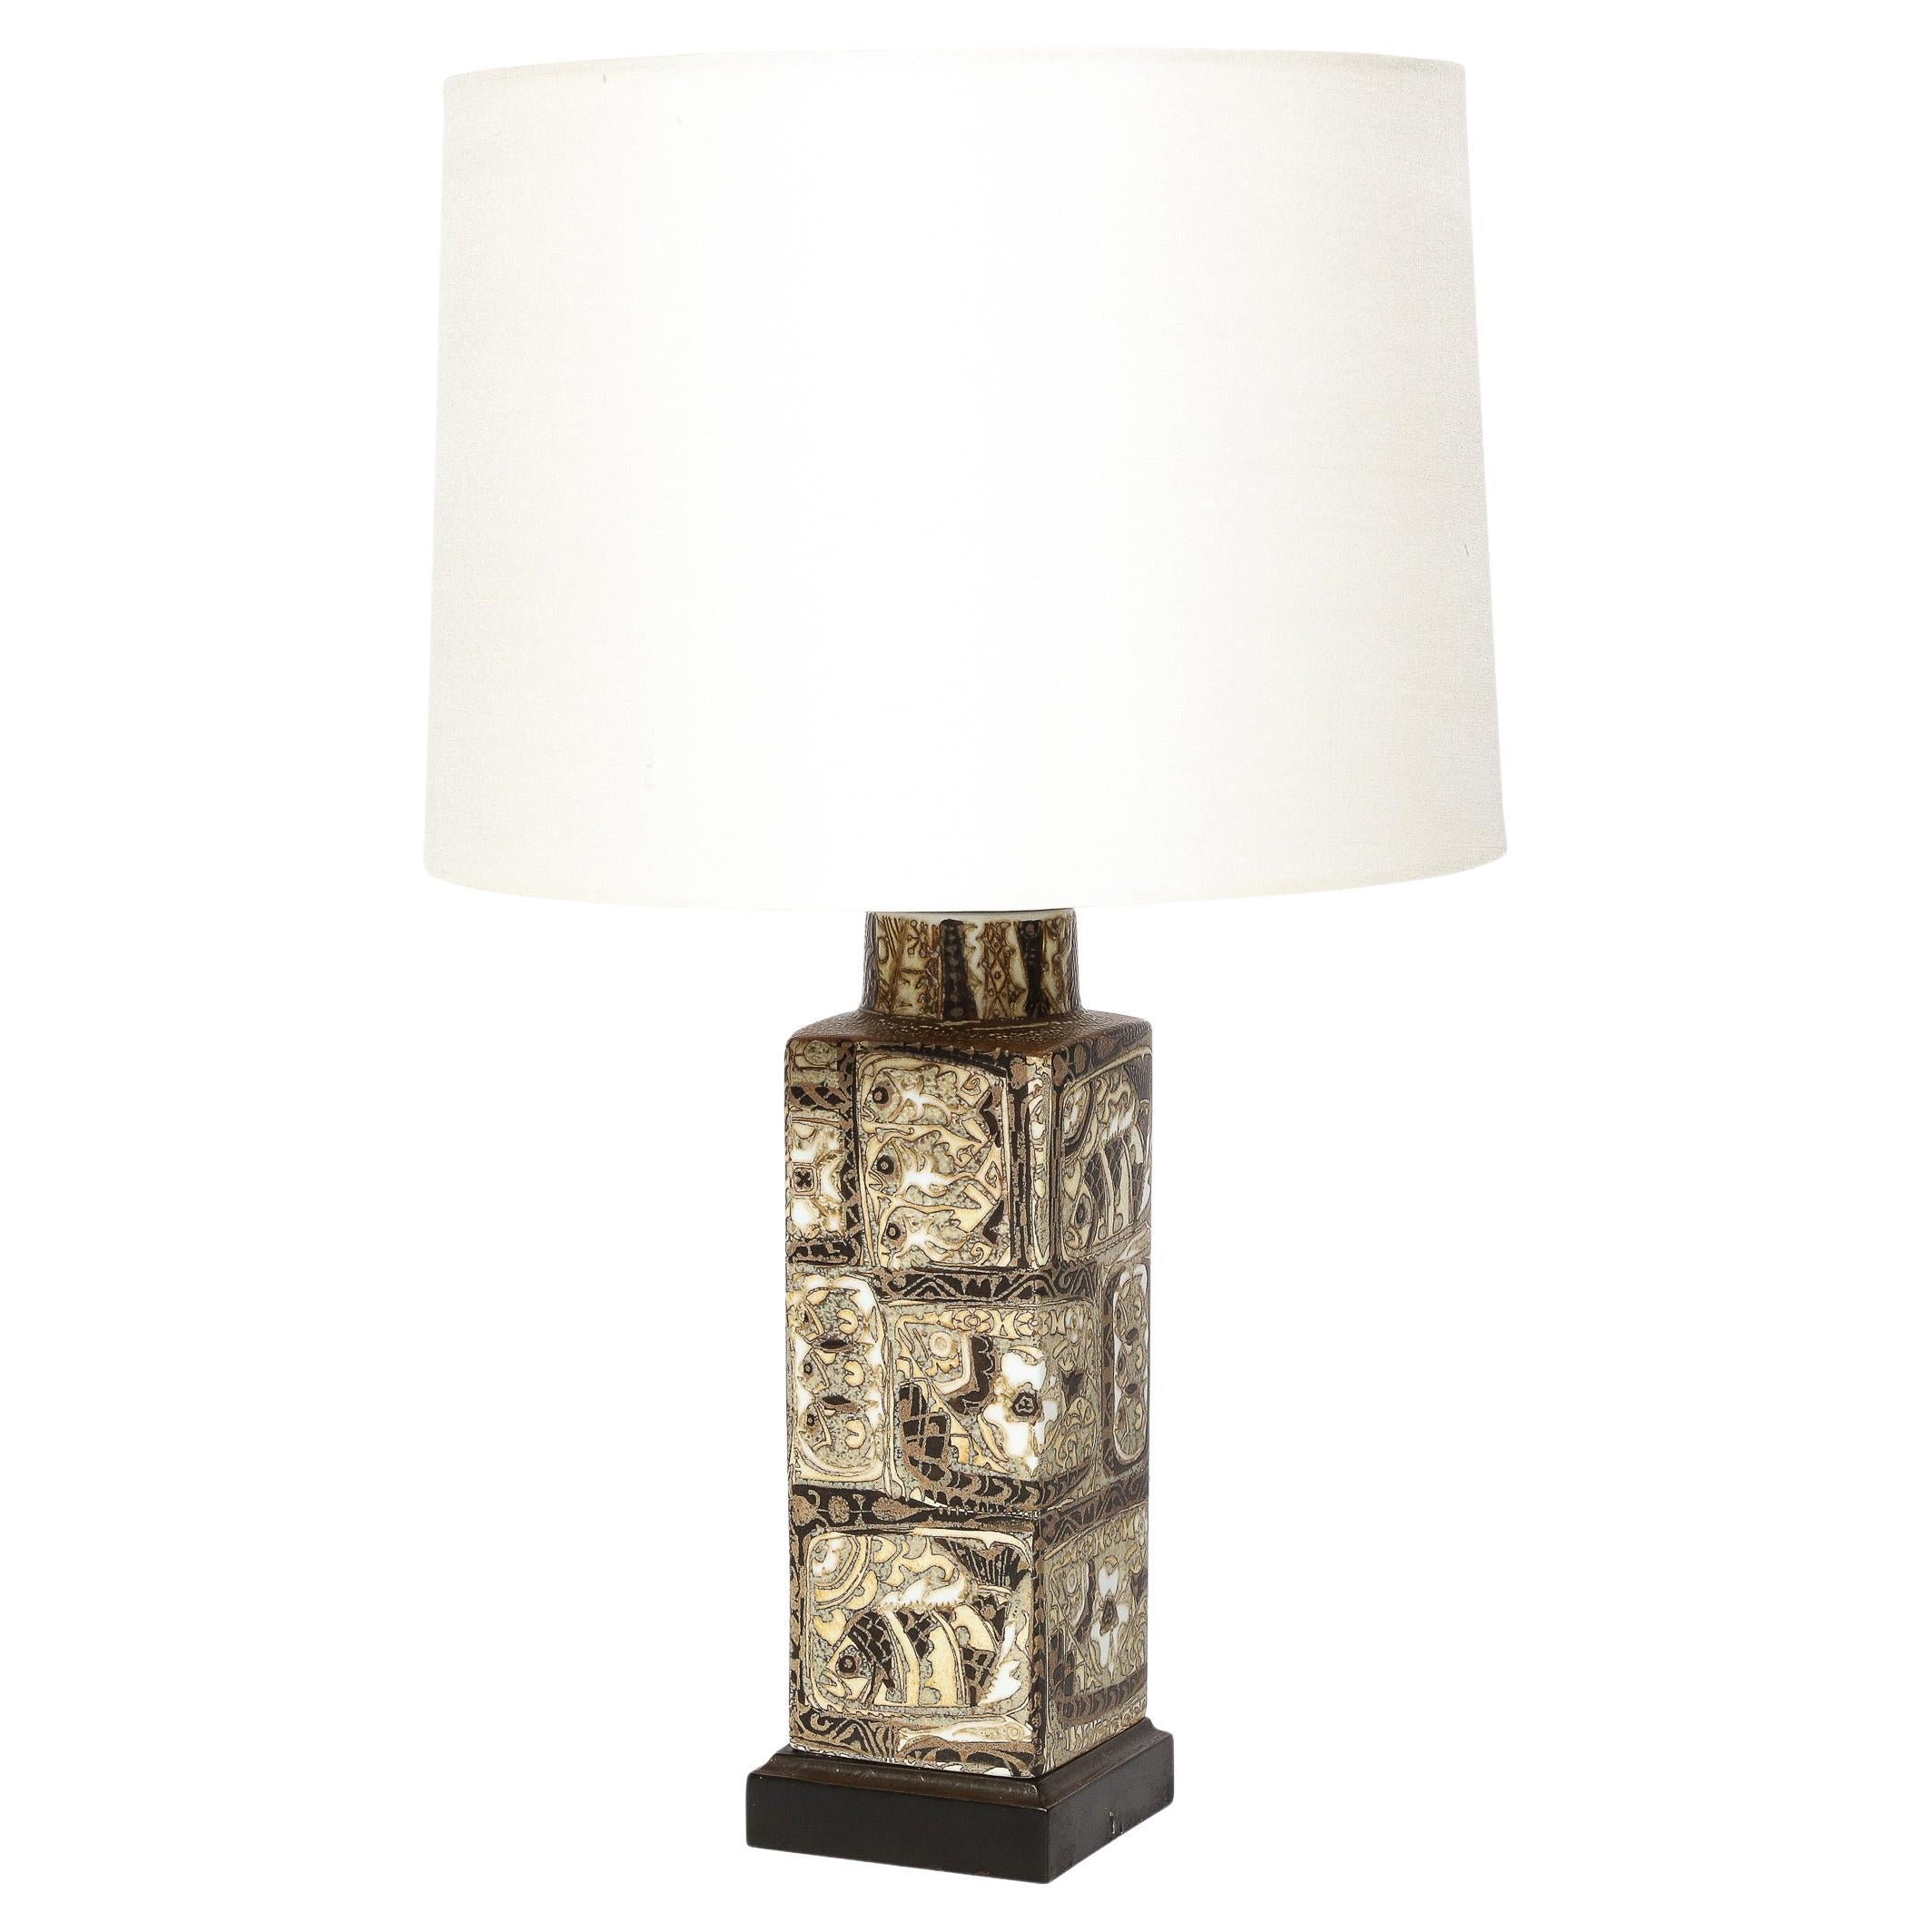 Hand Painted Ceramic Table Lamp with Oceanic Motifs by Royal Copenhagen